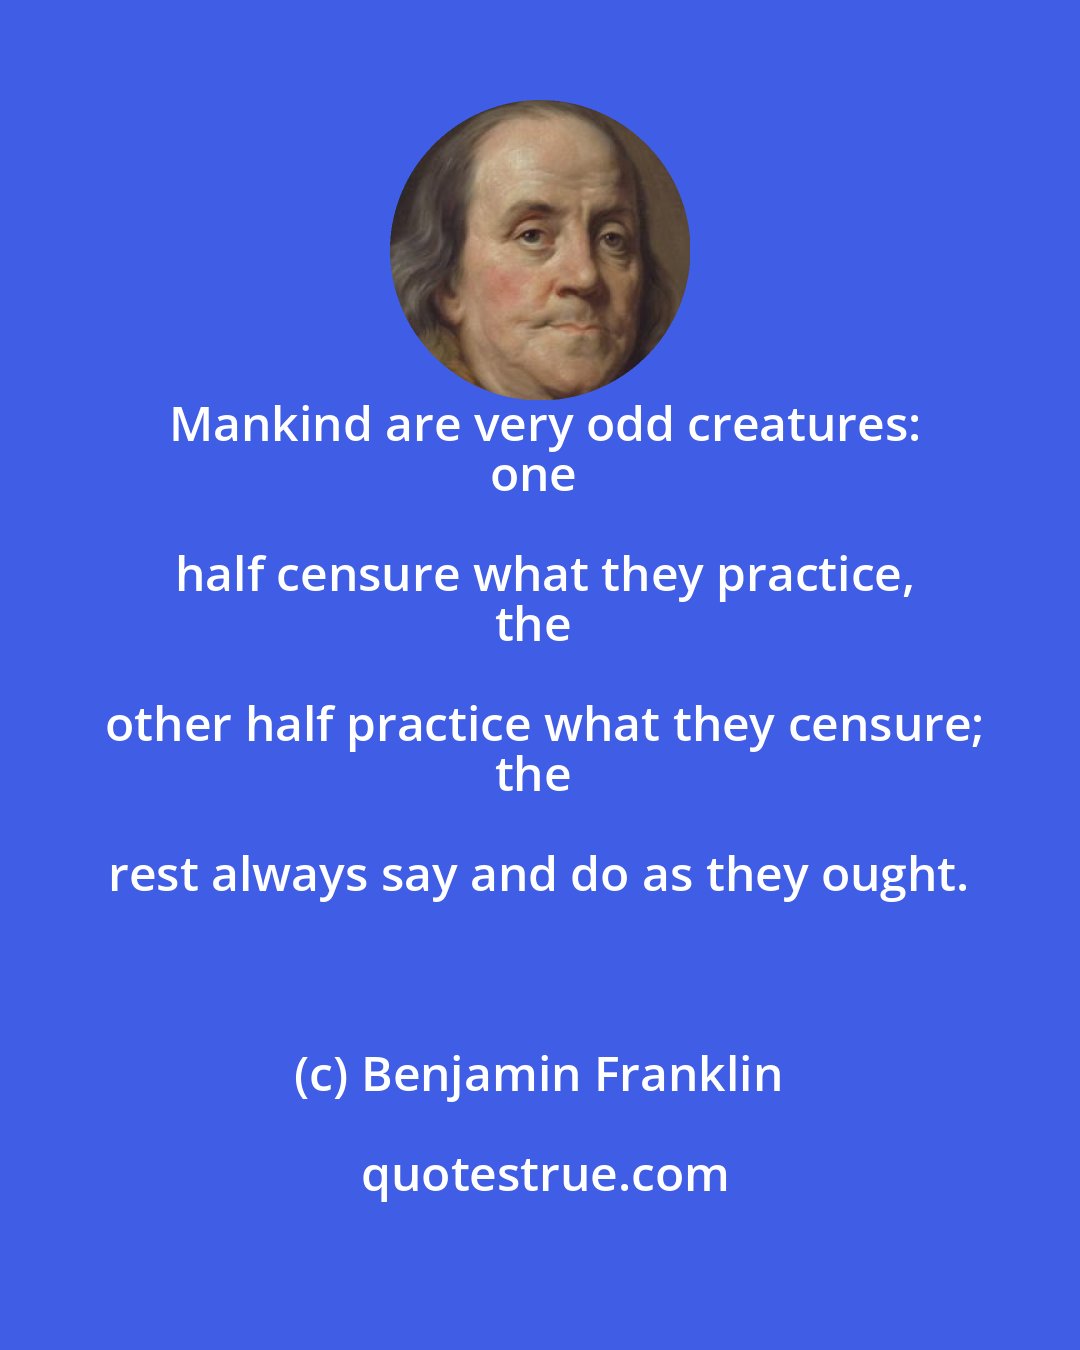 Benjamin Franklin: Mankind are very odd creatures:
one half censure what they practice,
the other half practice what they censure;
the rest always say and do as they ought.